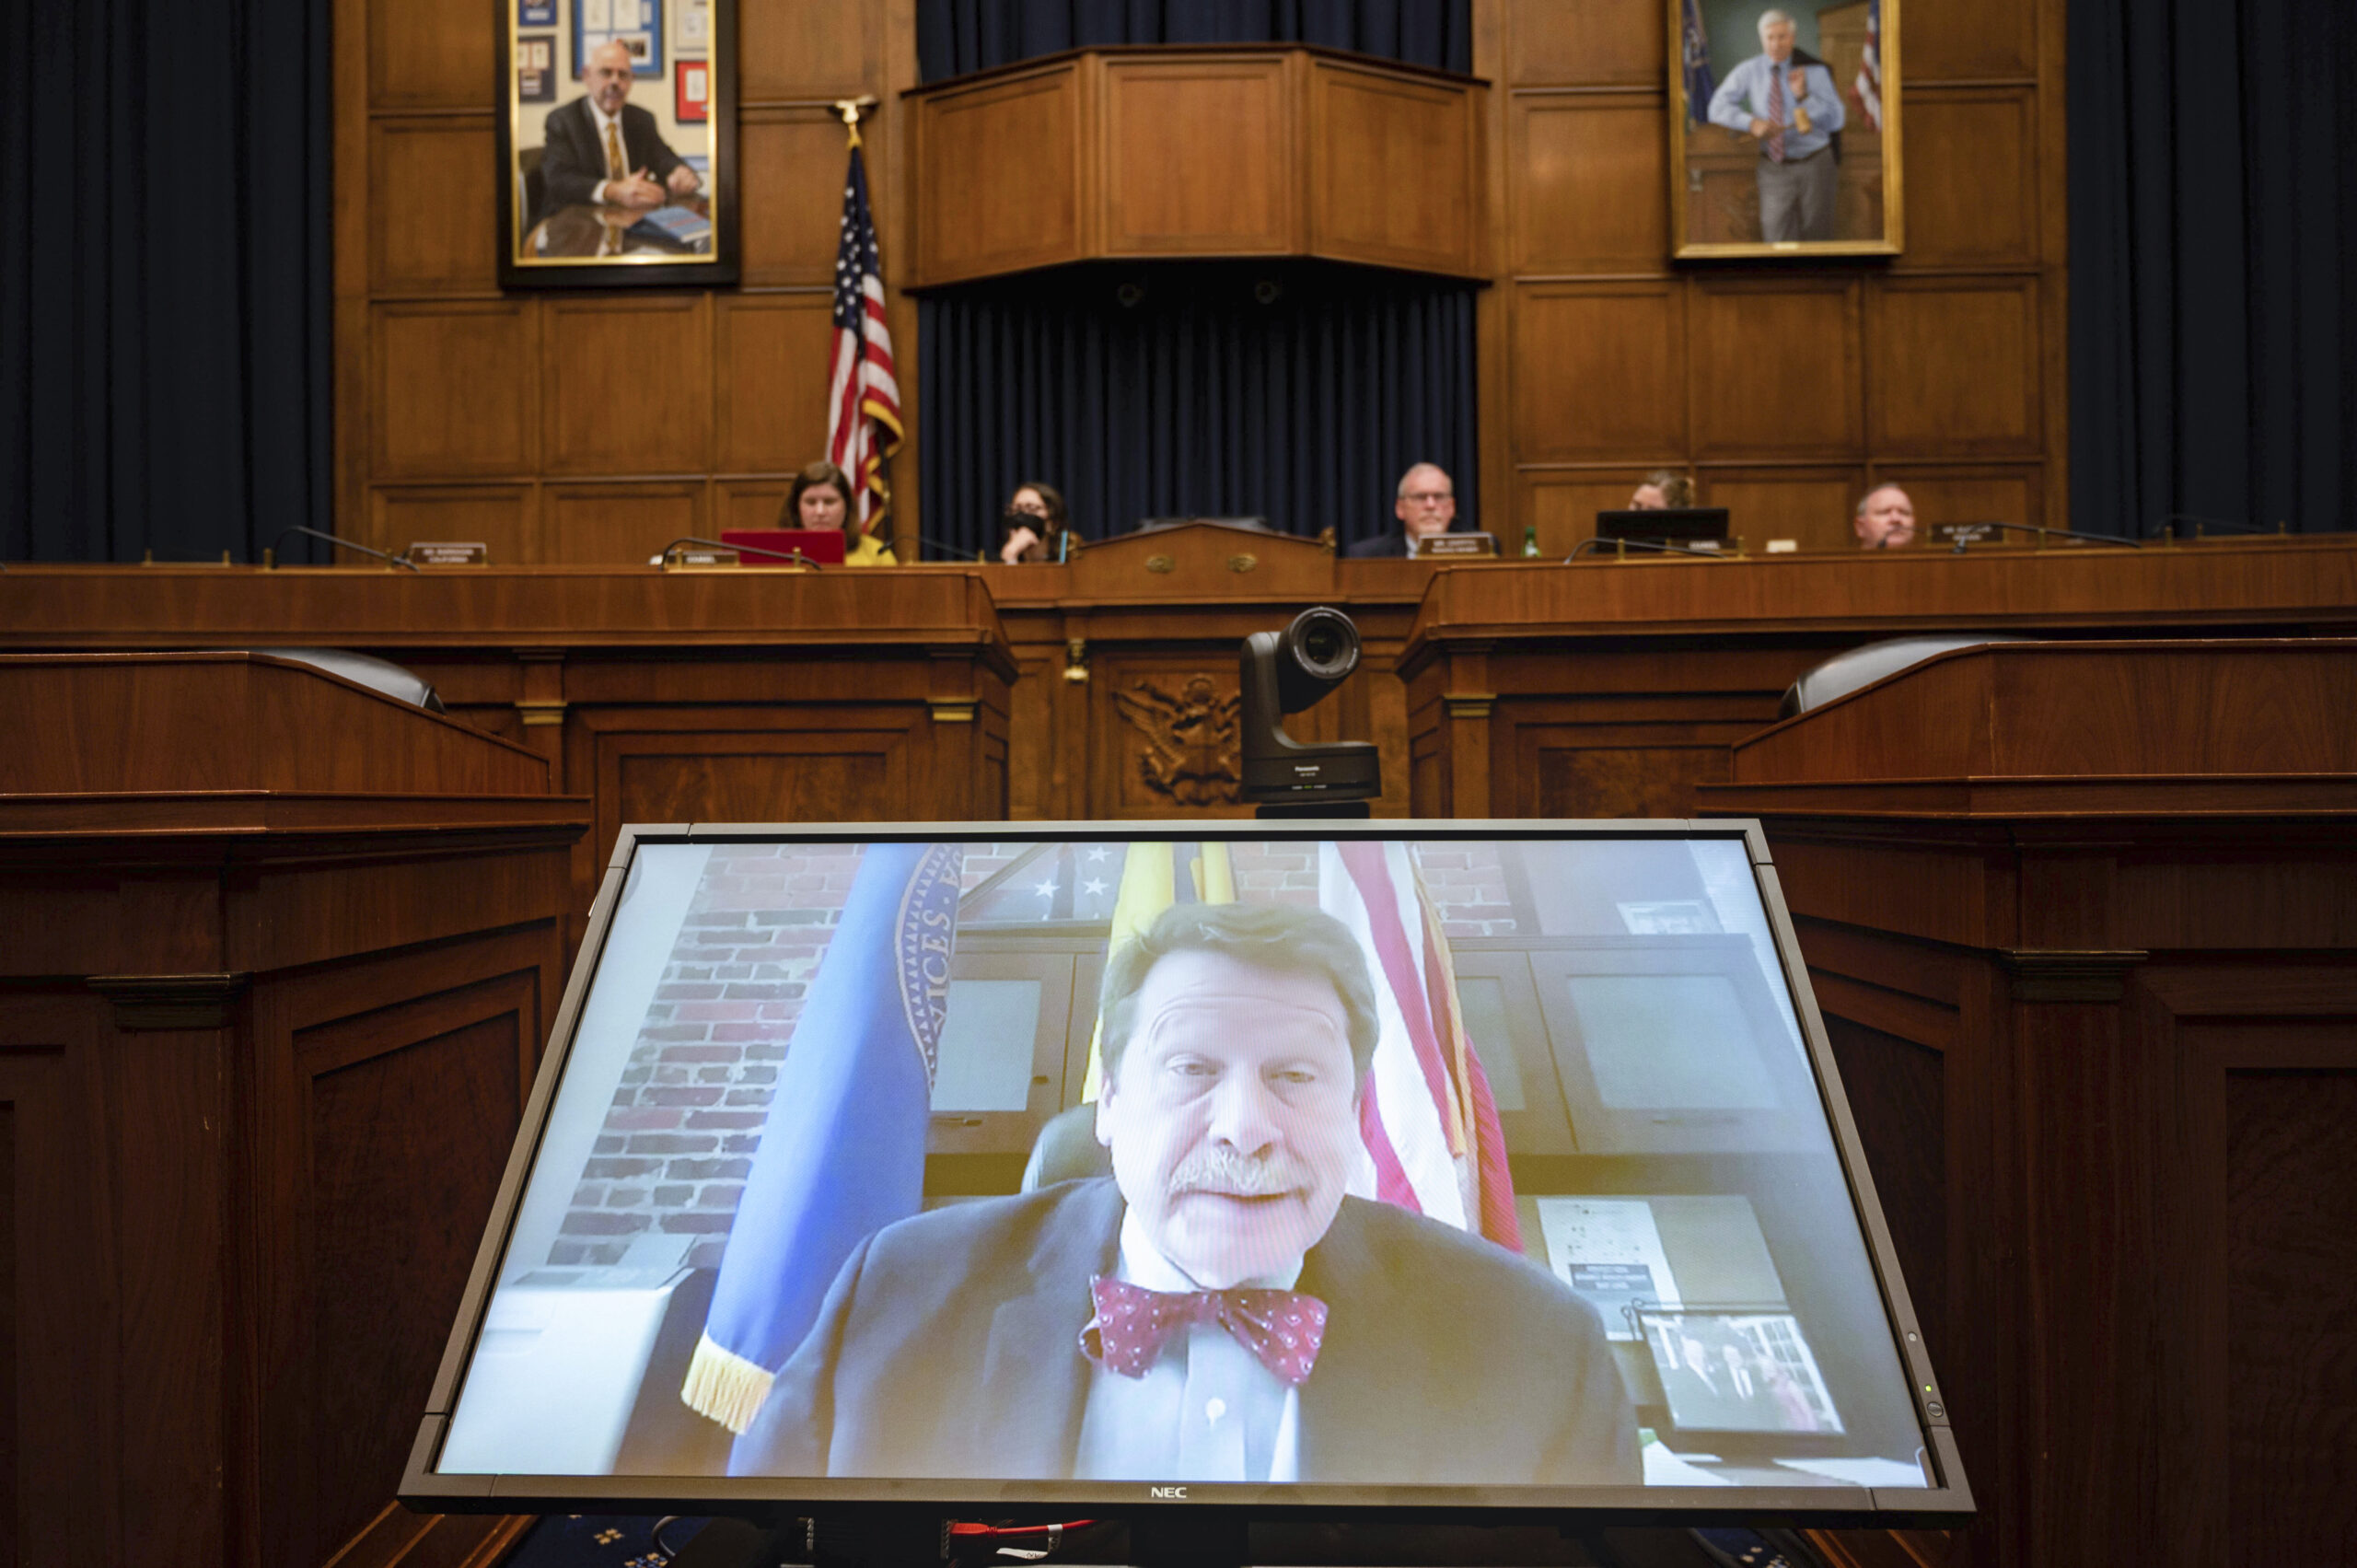 Food and Drug Administration Commissioner Robert Califf testifies via video during a House Commerce Oversight and Investigations subcommittee hybrid hearing on the nationwide baby formula shortage on Wednesday, May 25, 2022, in Washington. (AP Photo/Kevin Wolf)